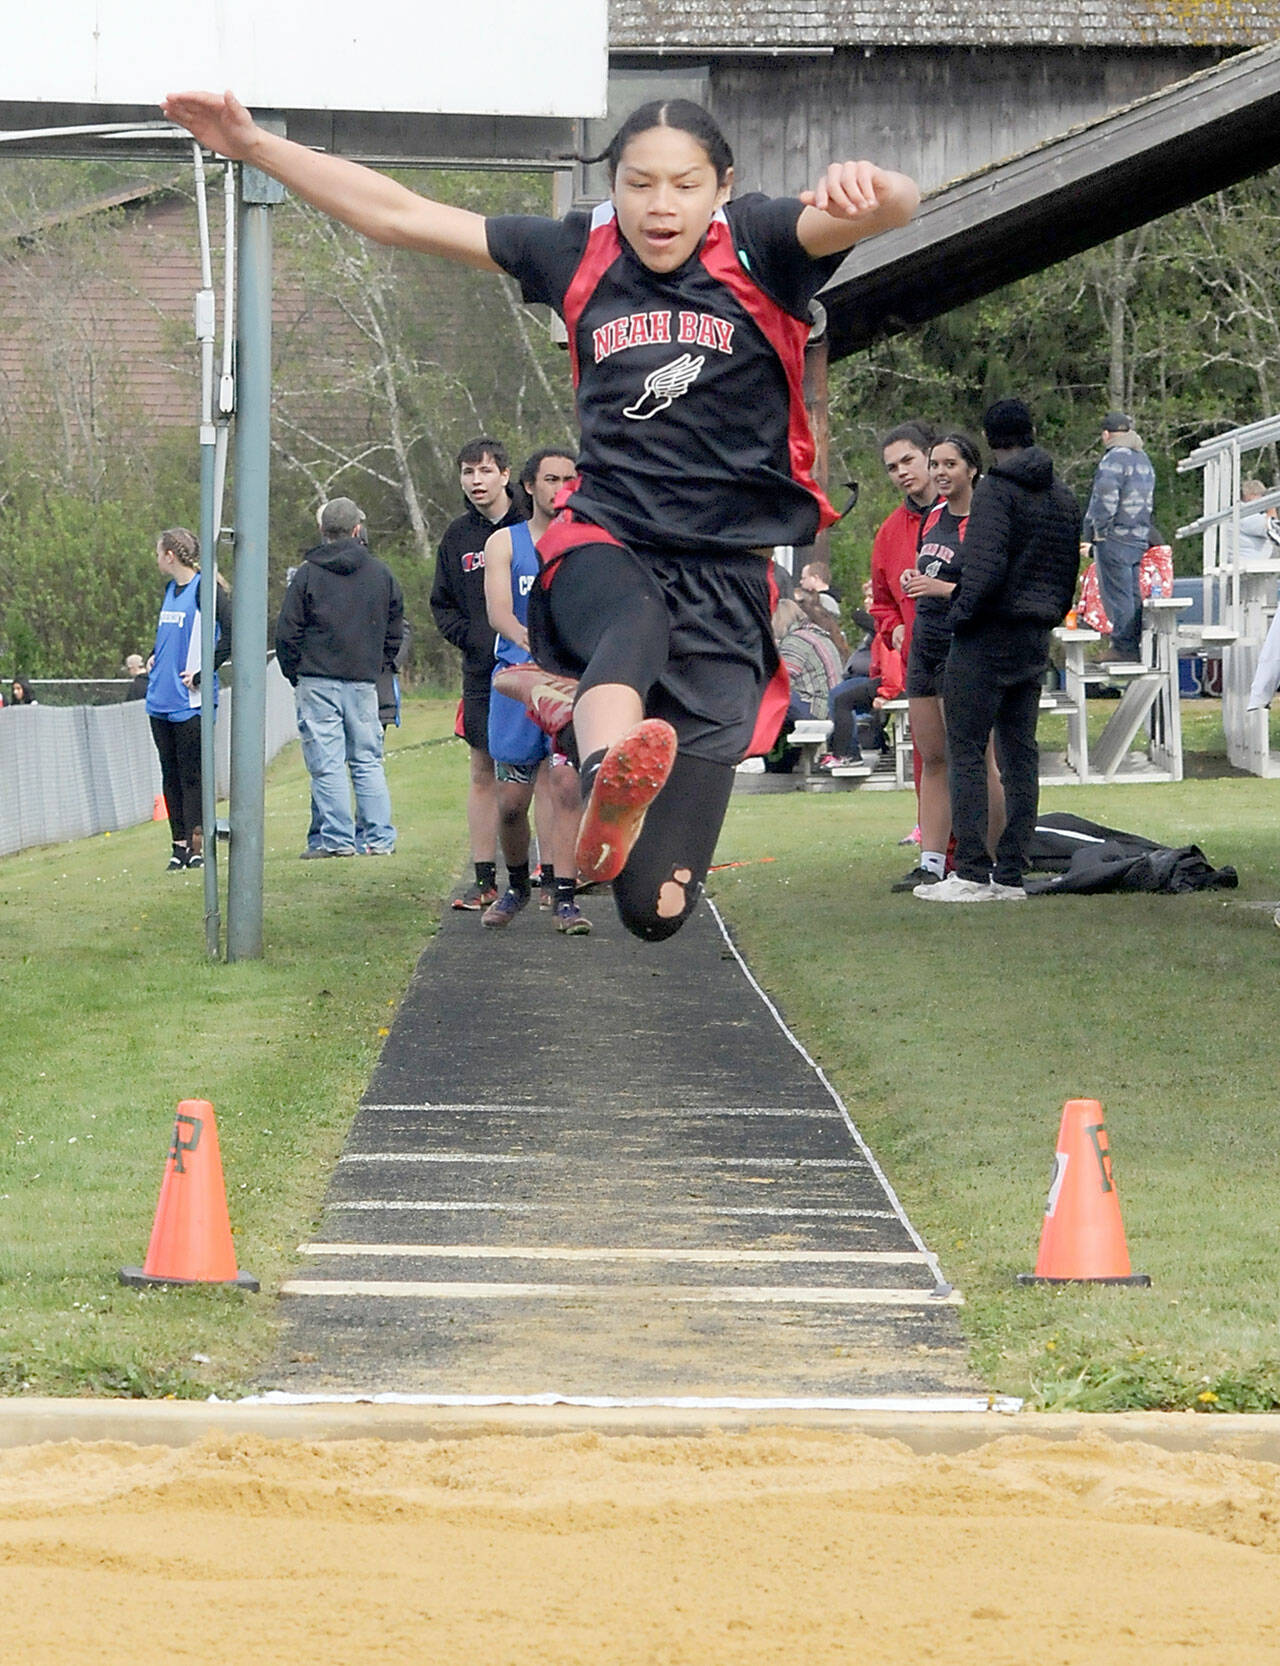 Makyah Chambers of Neah Bay leaps in the long jump on Friday in Joyce. (Keith Thorpe/Peninsula Daily News)